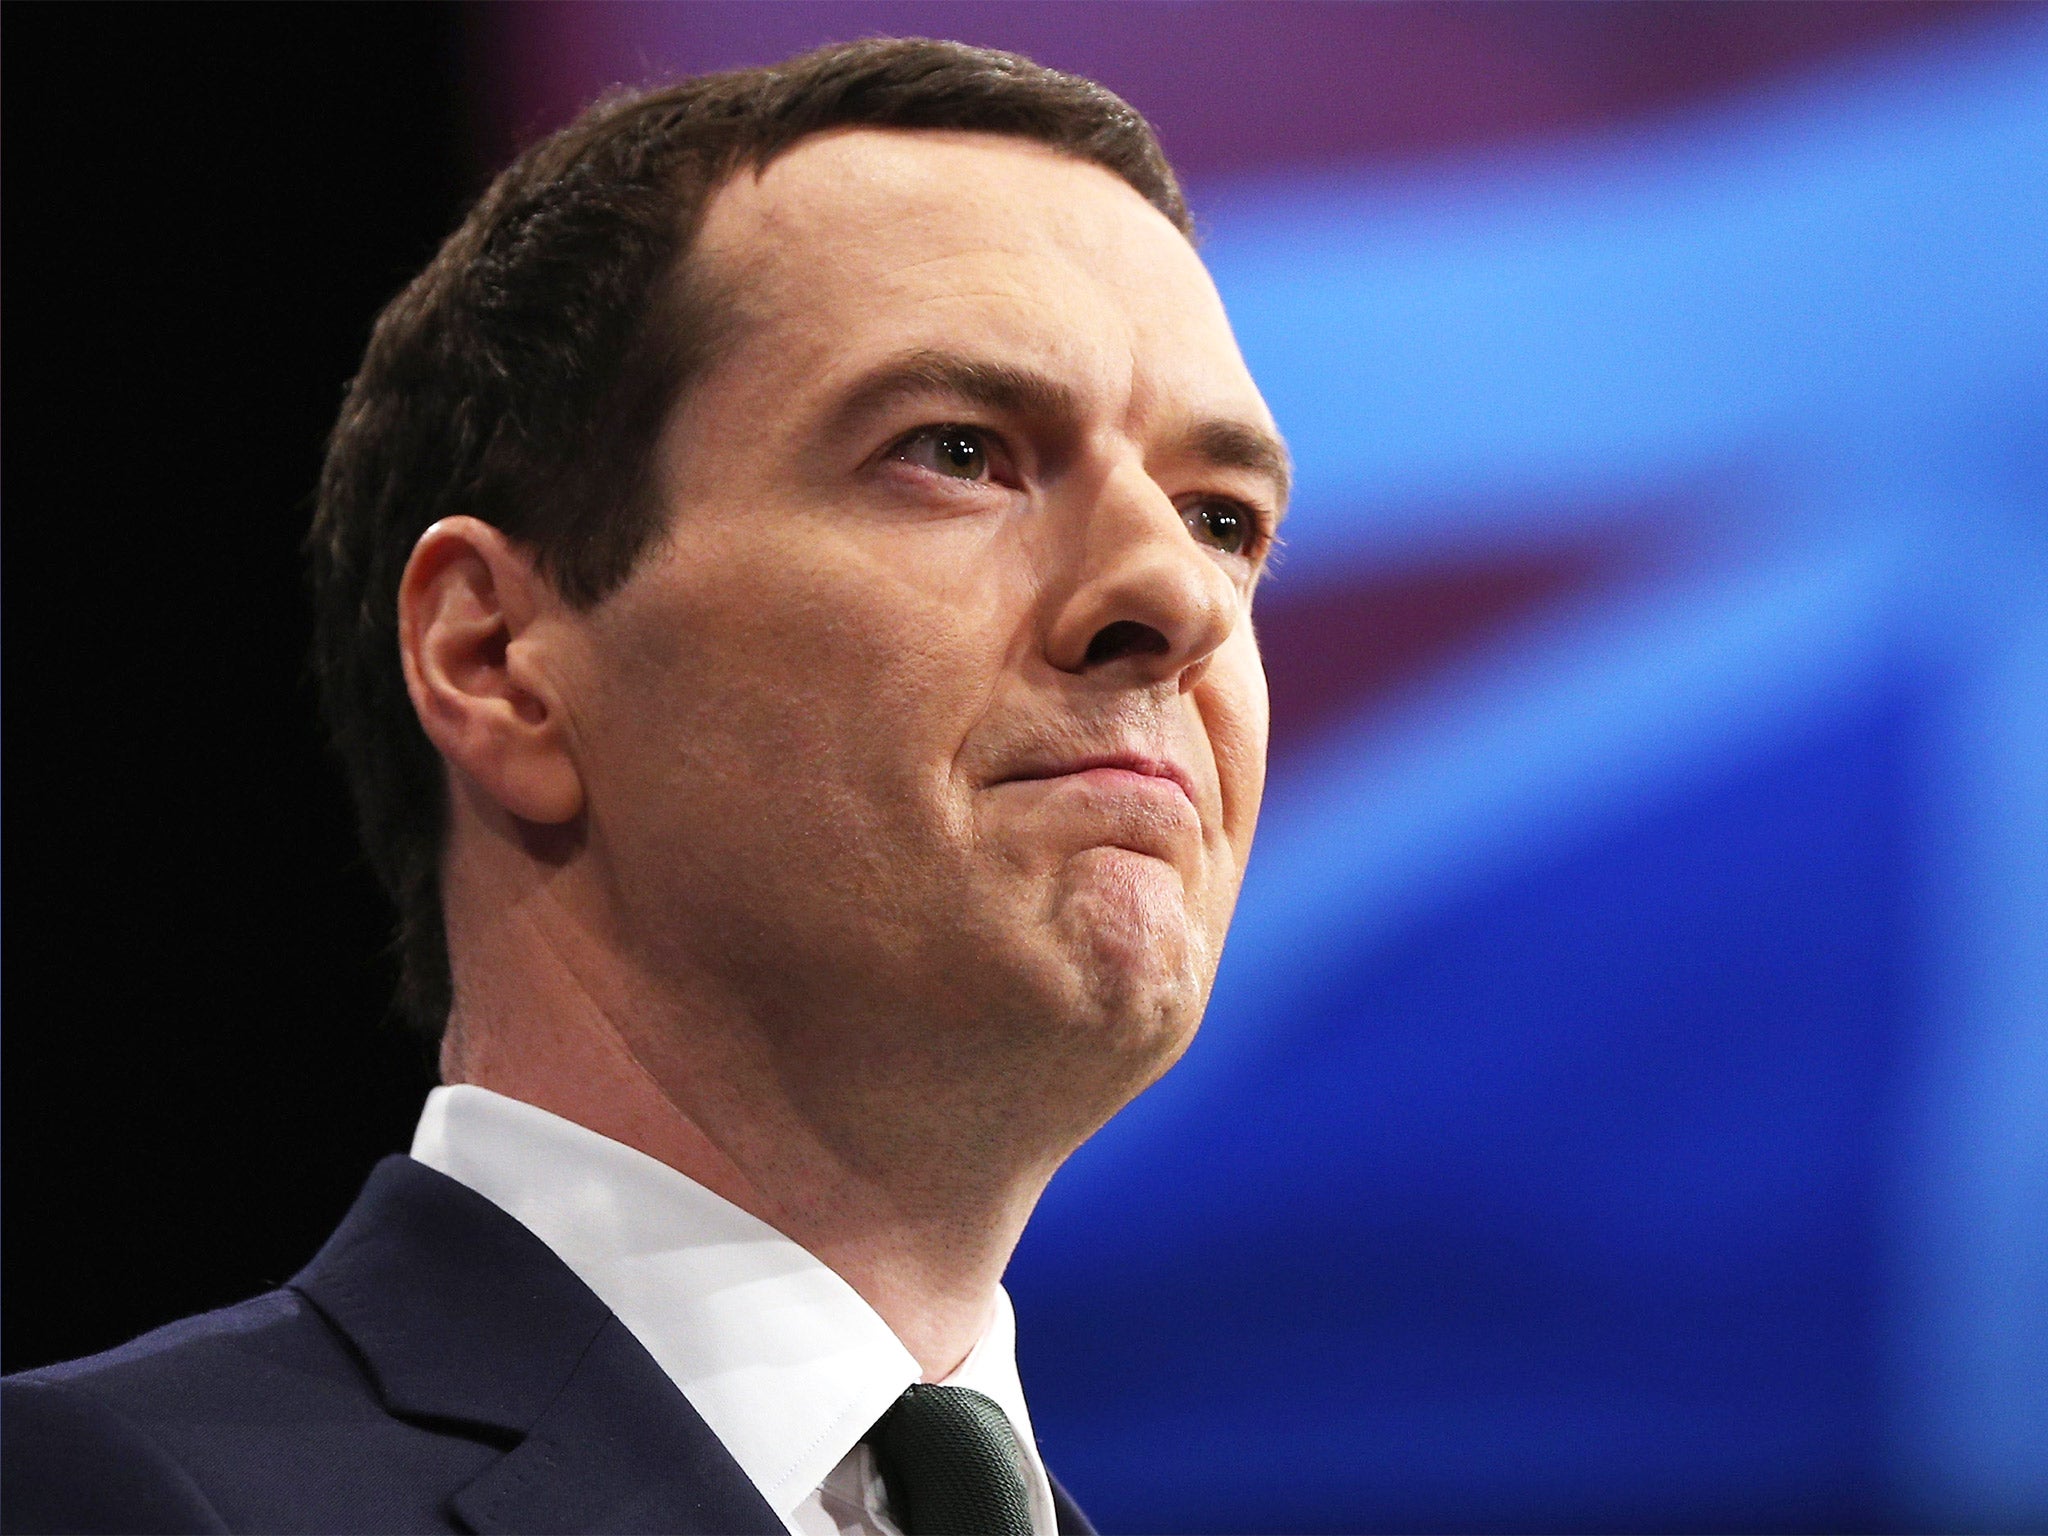 The Chancellor has already promised to raise the amount of tax-free earnings to £11,000 by 2017